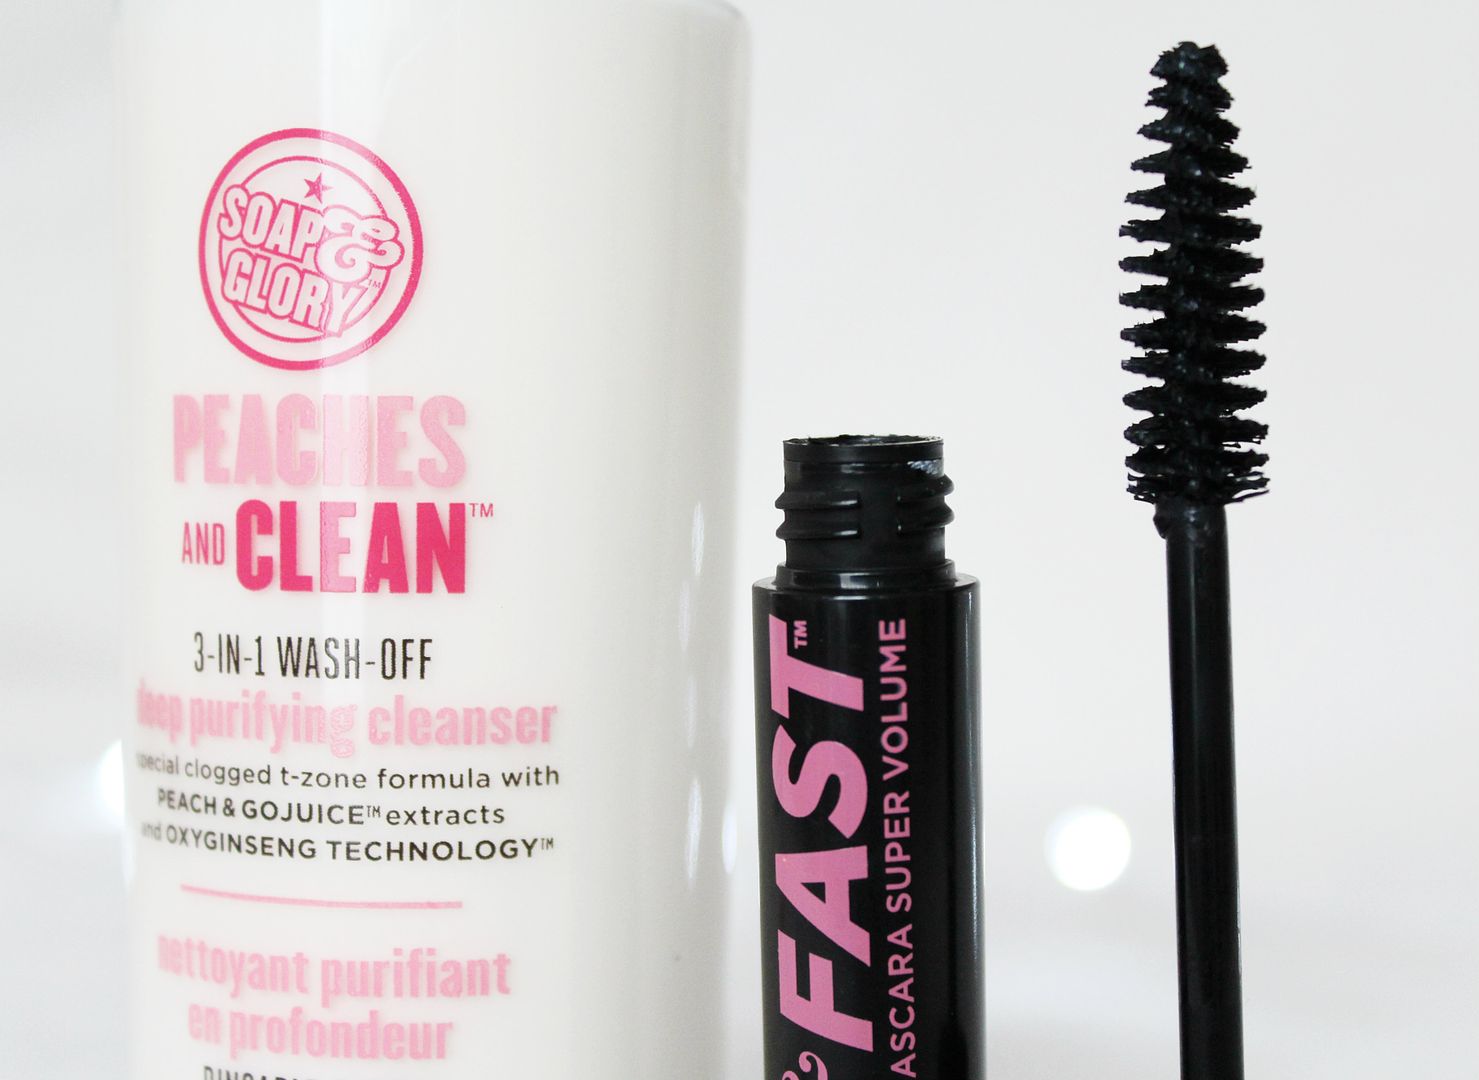 Soap And Glory Beauty Haul Winter 2015 Peaches And Clean Thick And Fast Mascara Super Jet Black Wand Up Close Belle-Amie UK Beauty Fashion Lifestyle Blog